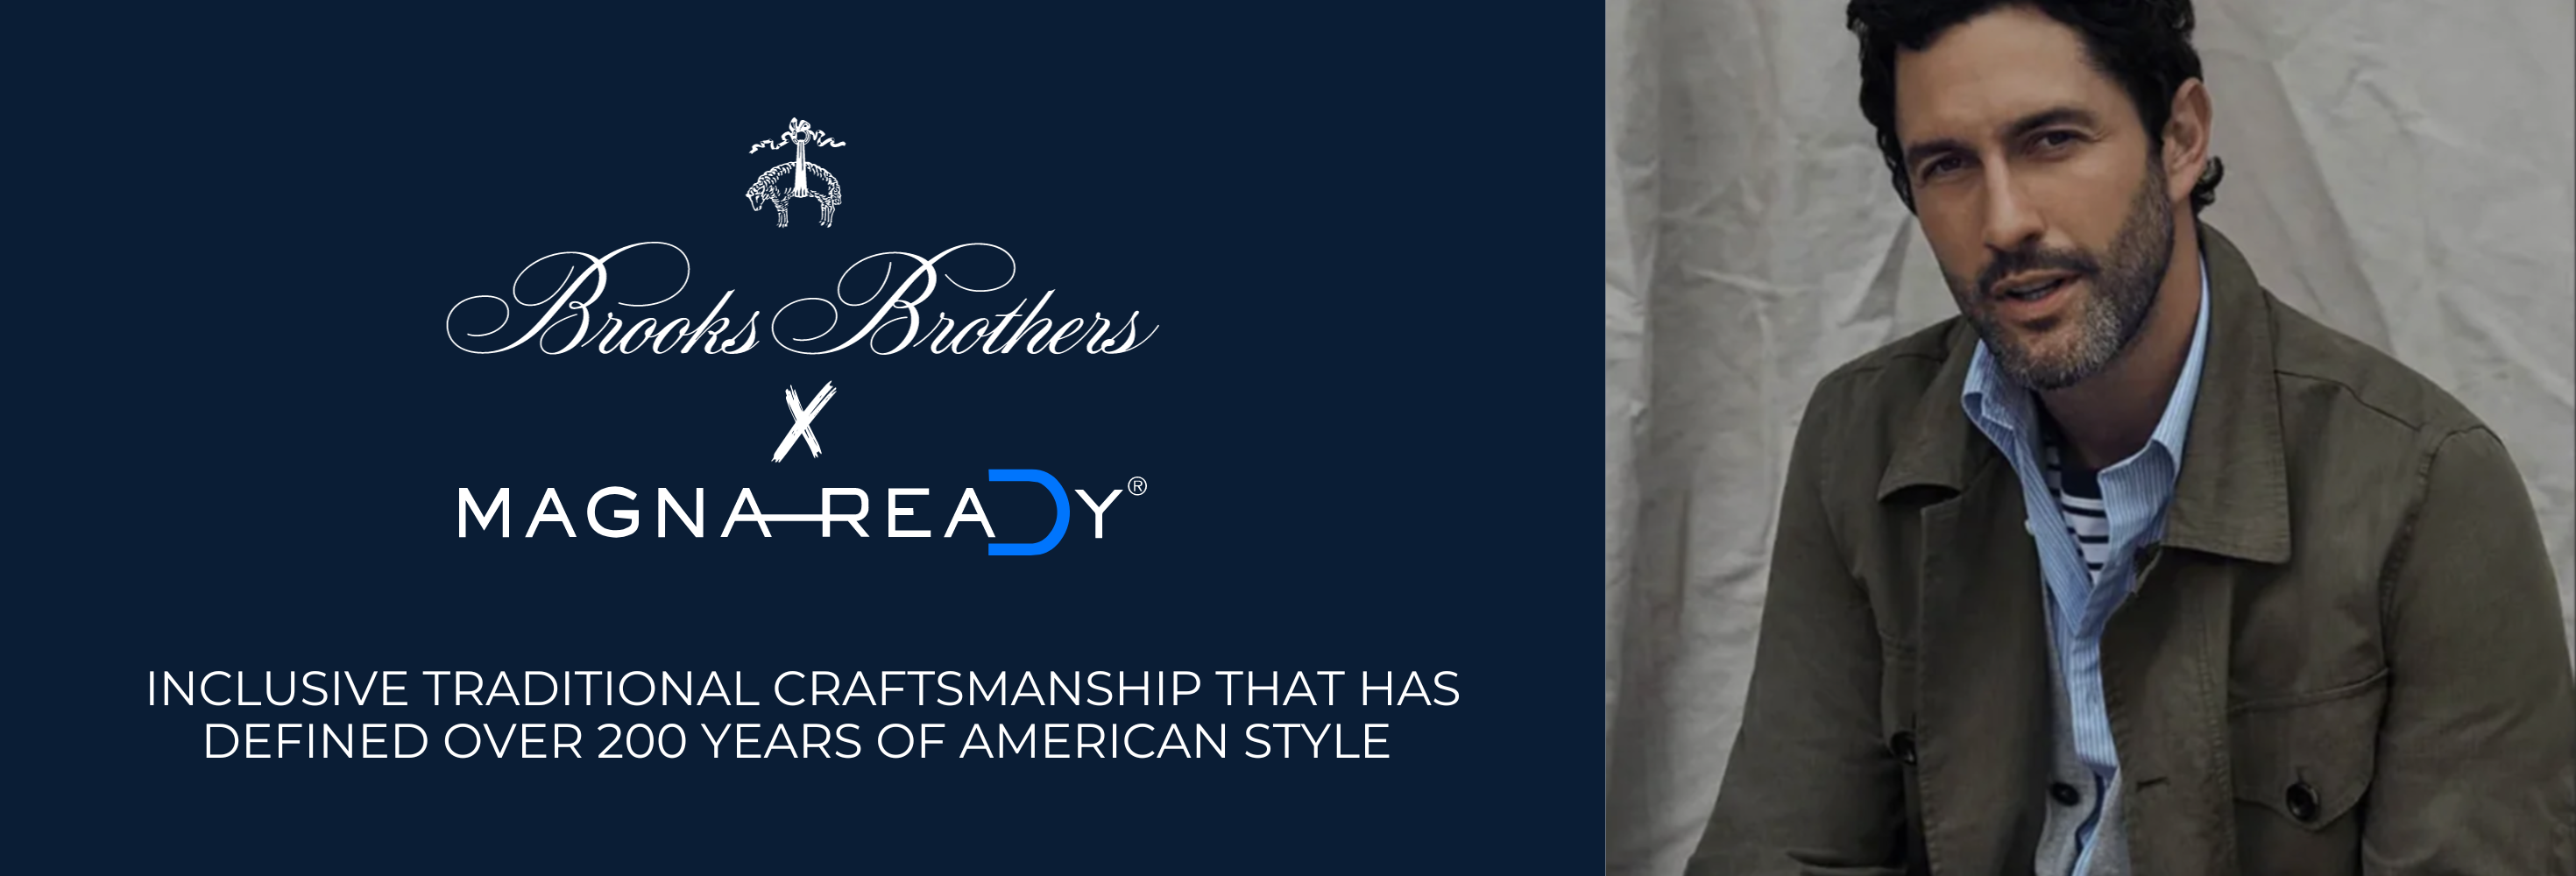 Brooks Brothers X MagnaReady Stretch Long Sleeve Blue and White Stripe